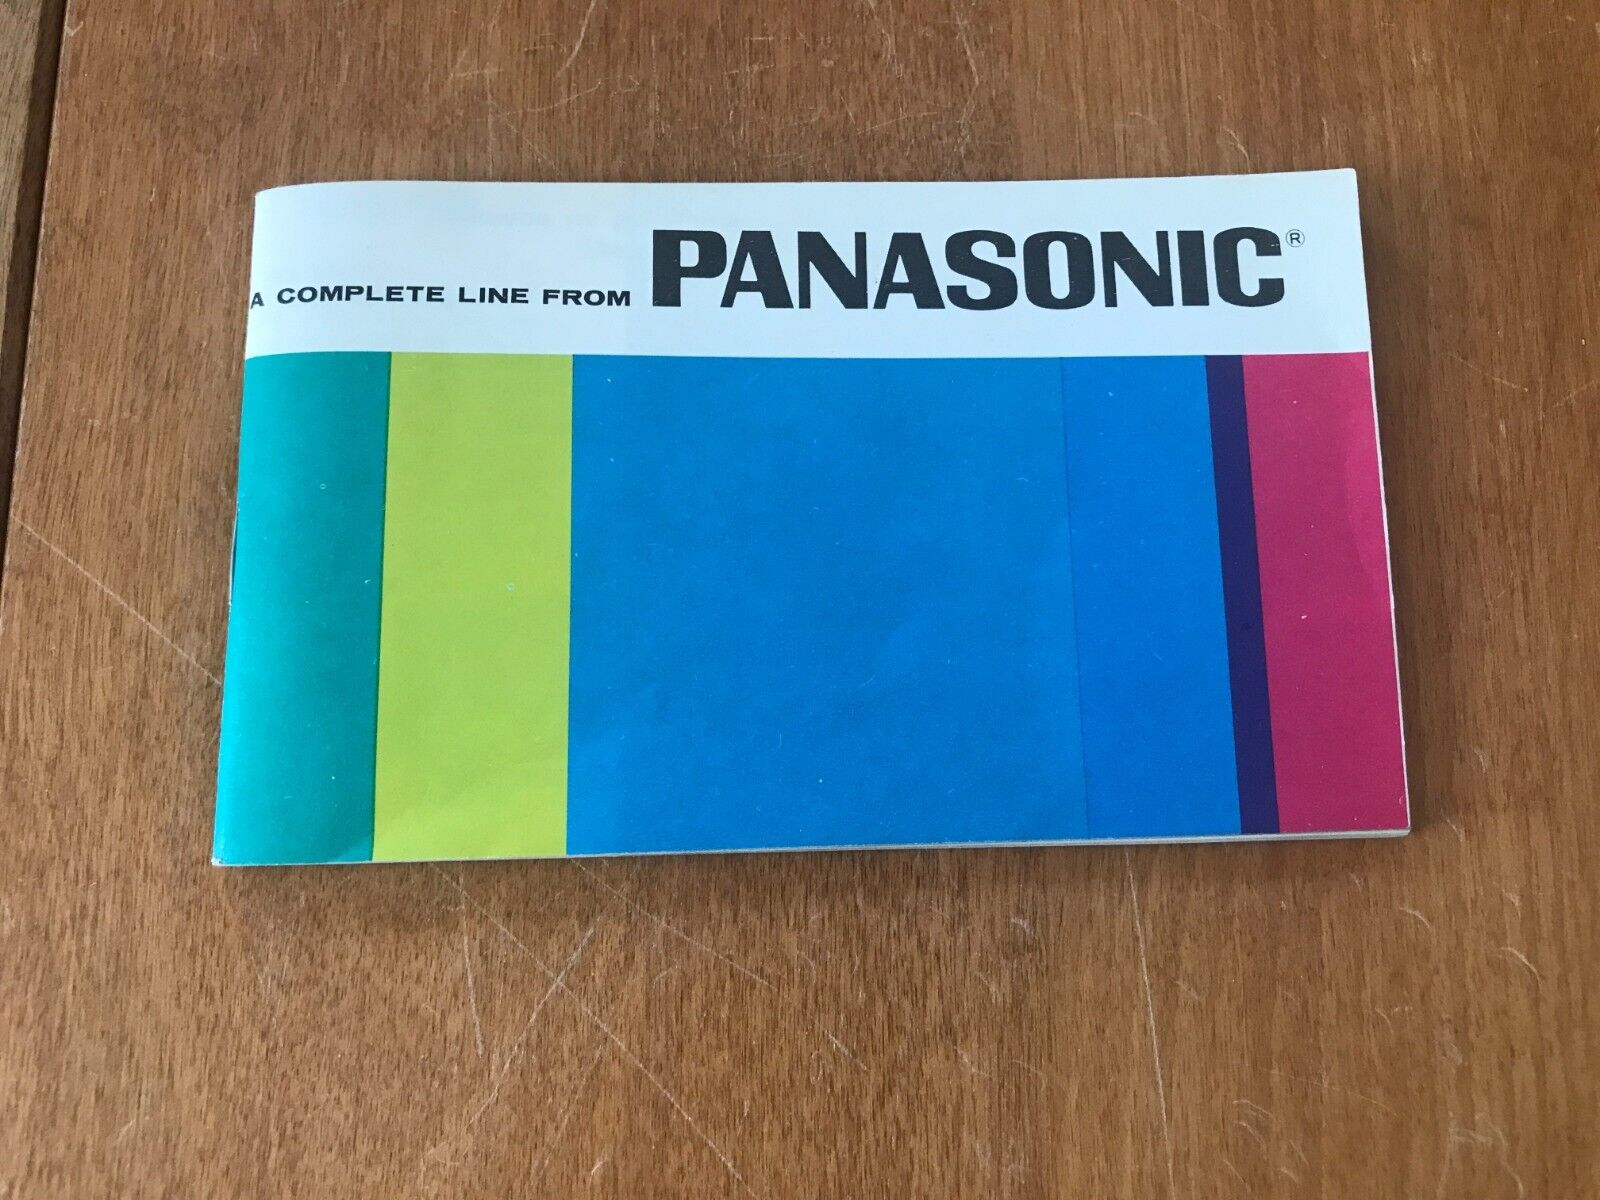 Vintage Panasonic 44page color product guide - TVs, Radios, tape recorders 1960s